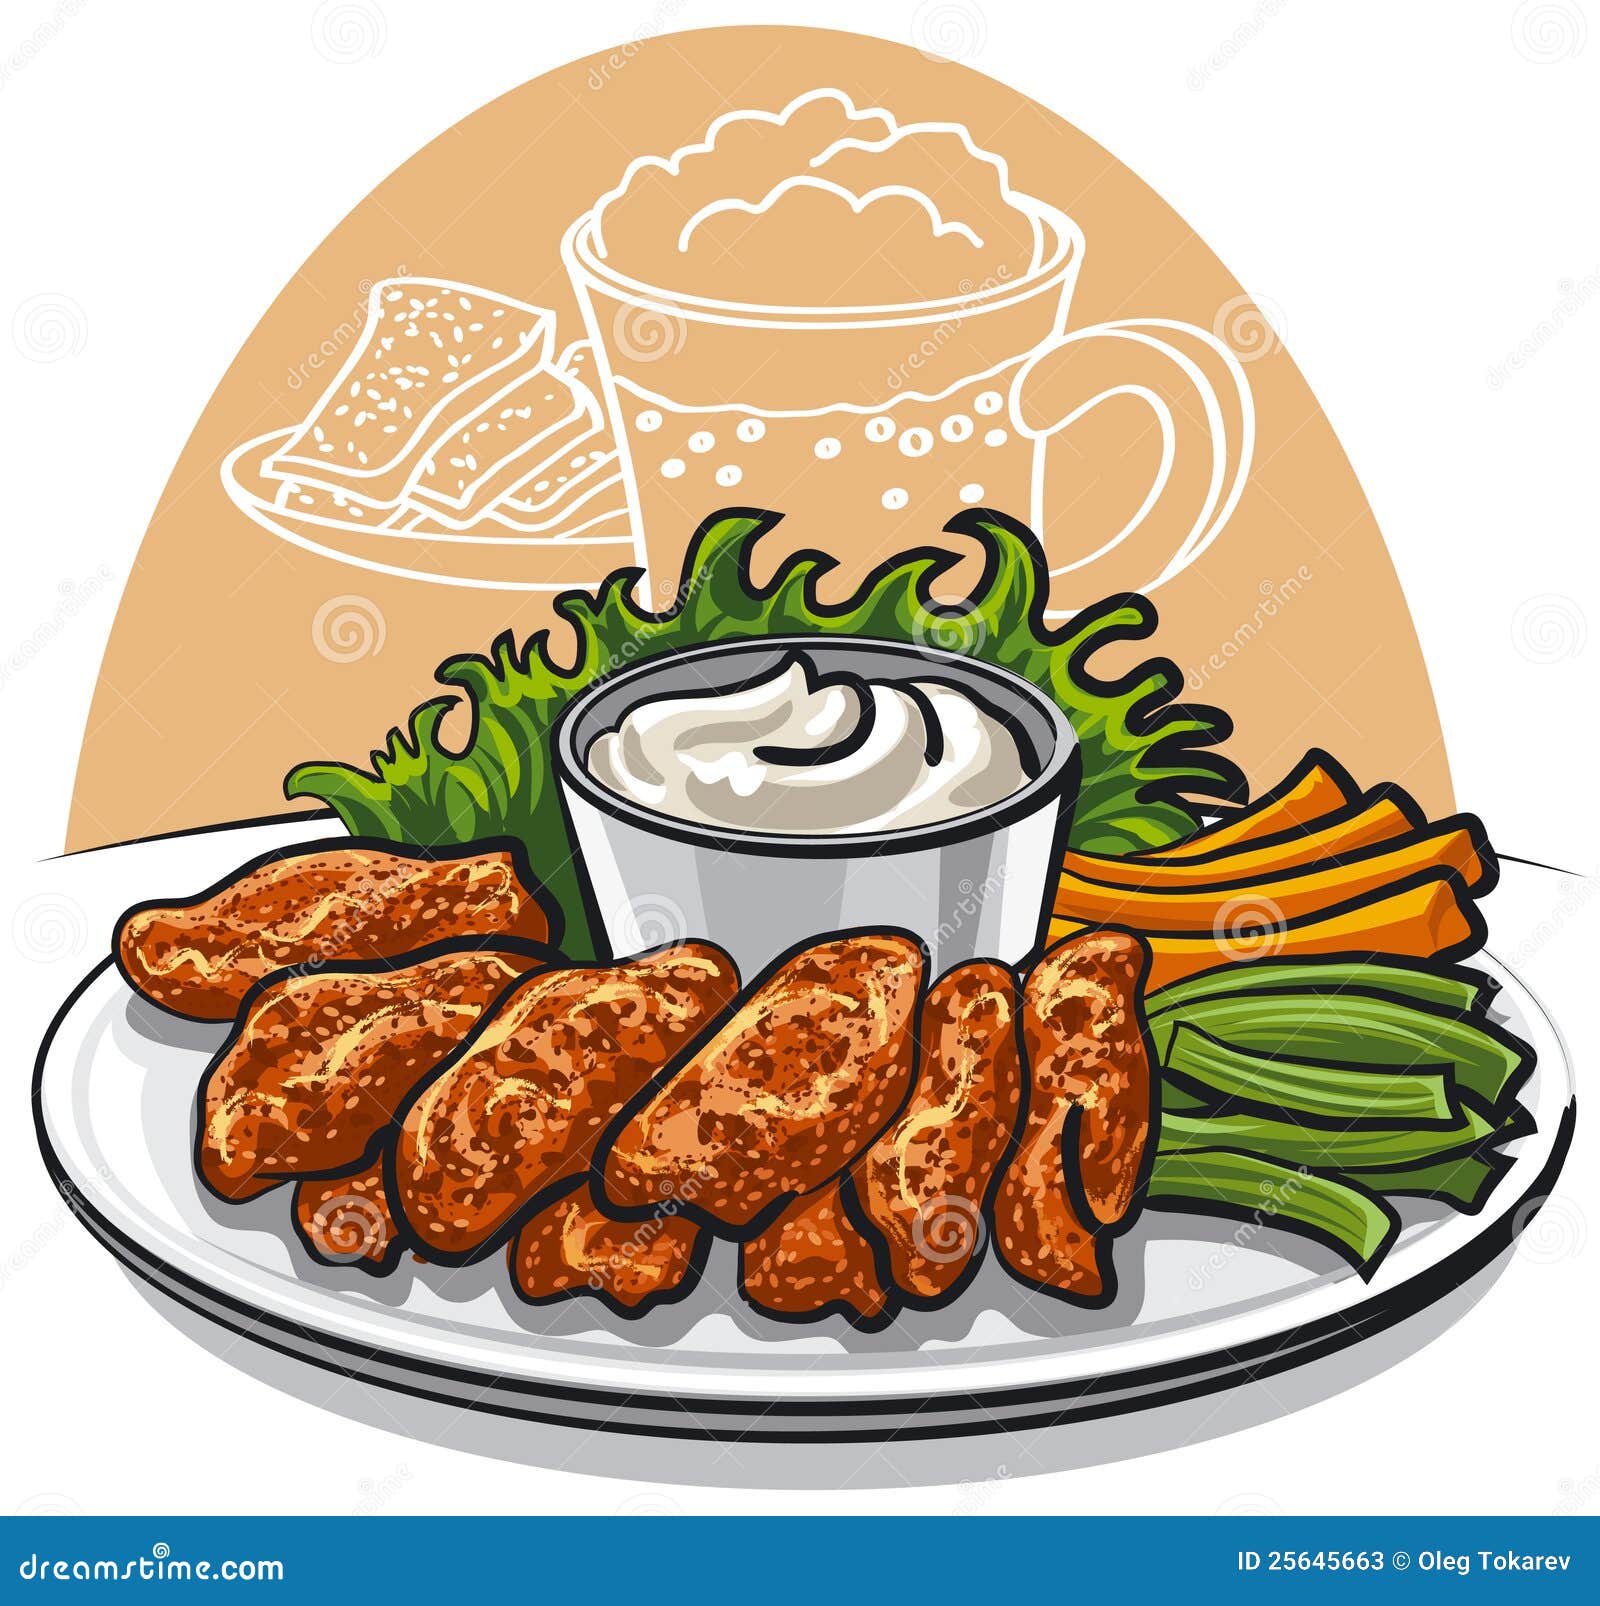 clipart fried chicken wings - photo #25